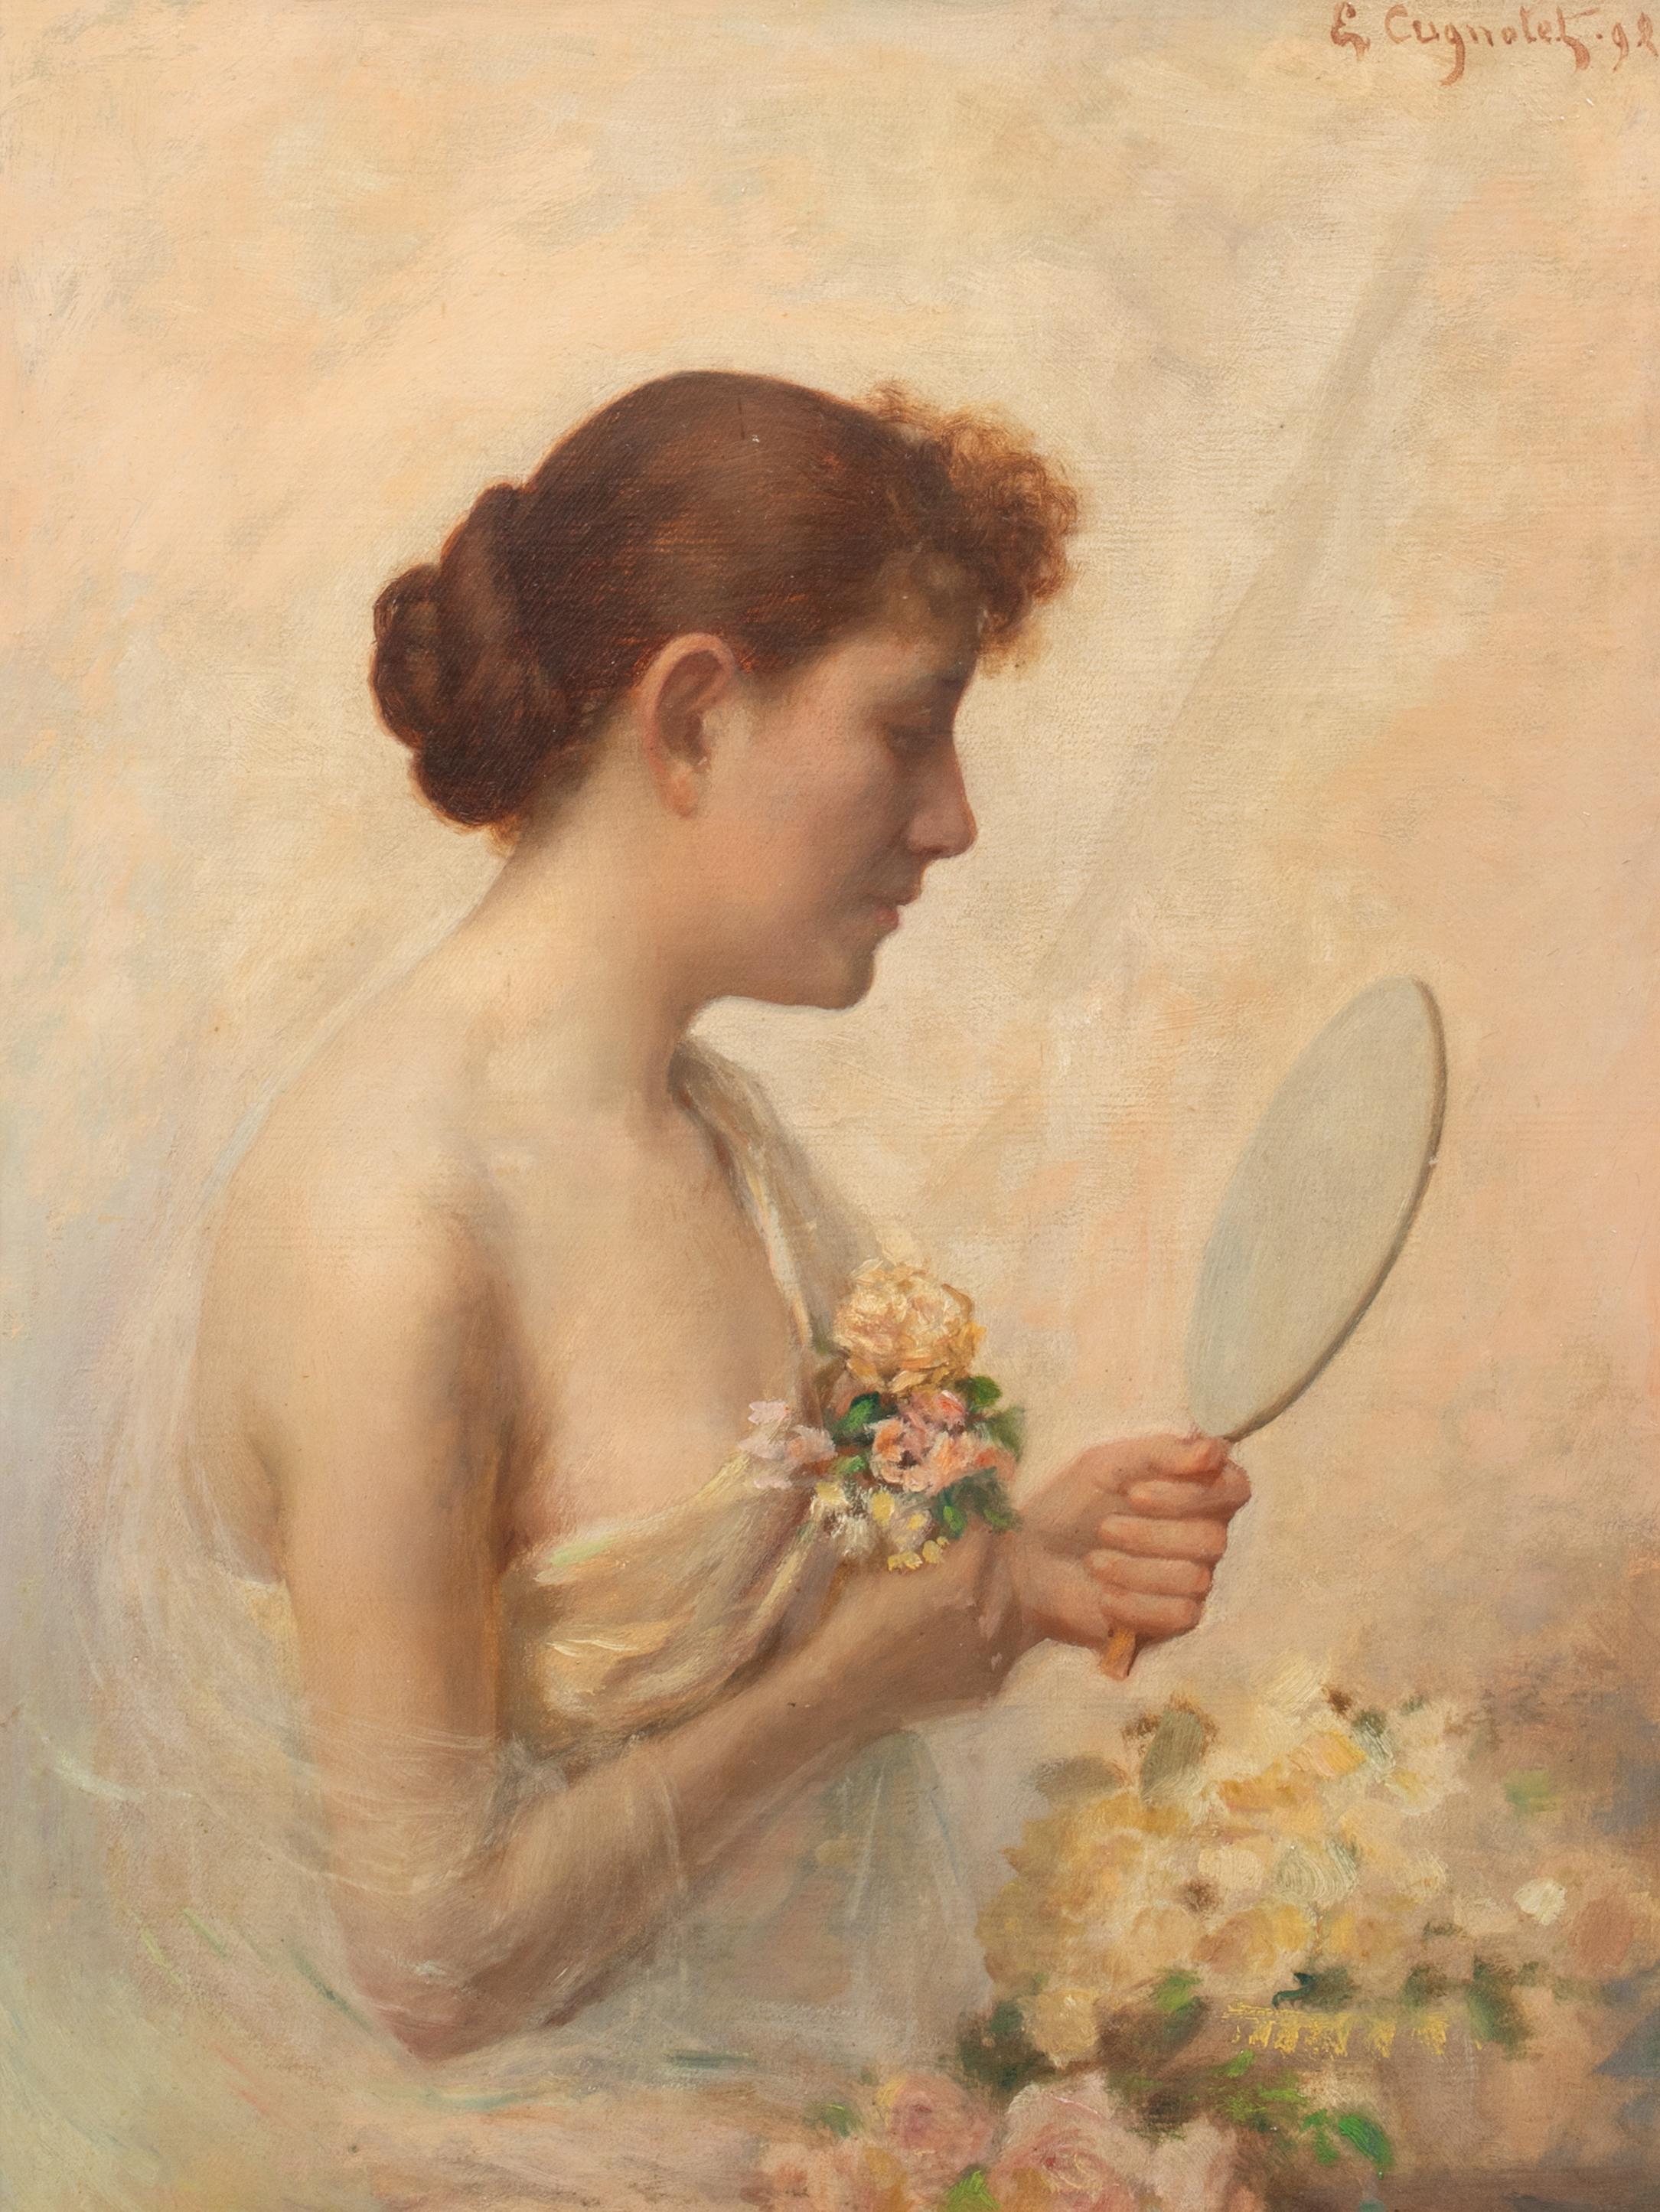 Le Miroir, dated 1892 

by ÉDOUARD CUGNOTET (1848-1899)

Large 19th Century French portrait of a lady looking into a mirror, oil on canvas by Edouard Cugnotet. Good quality and condition, signed and dated. Presented in its original antique gilt